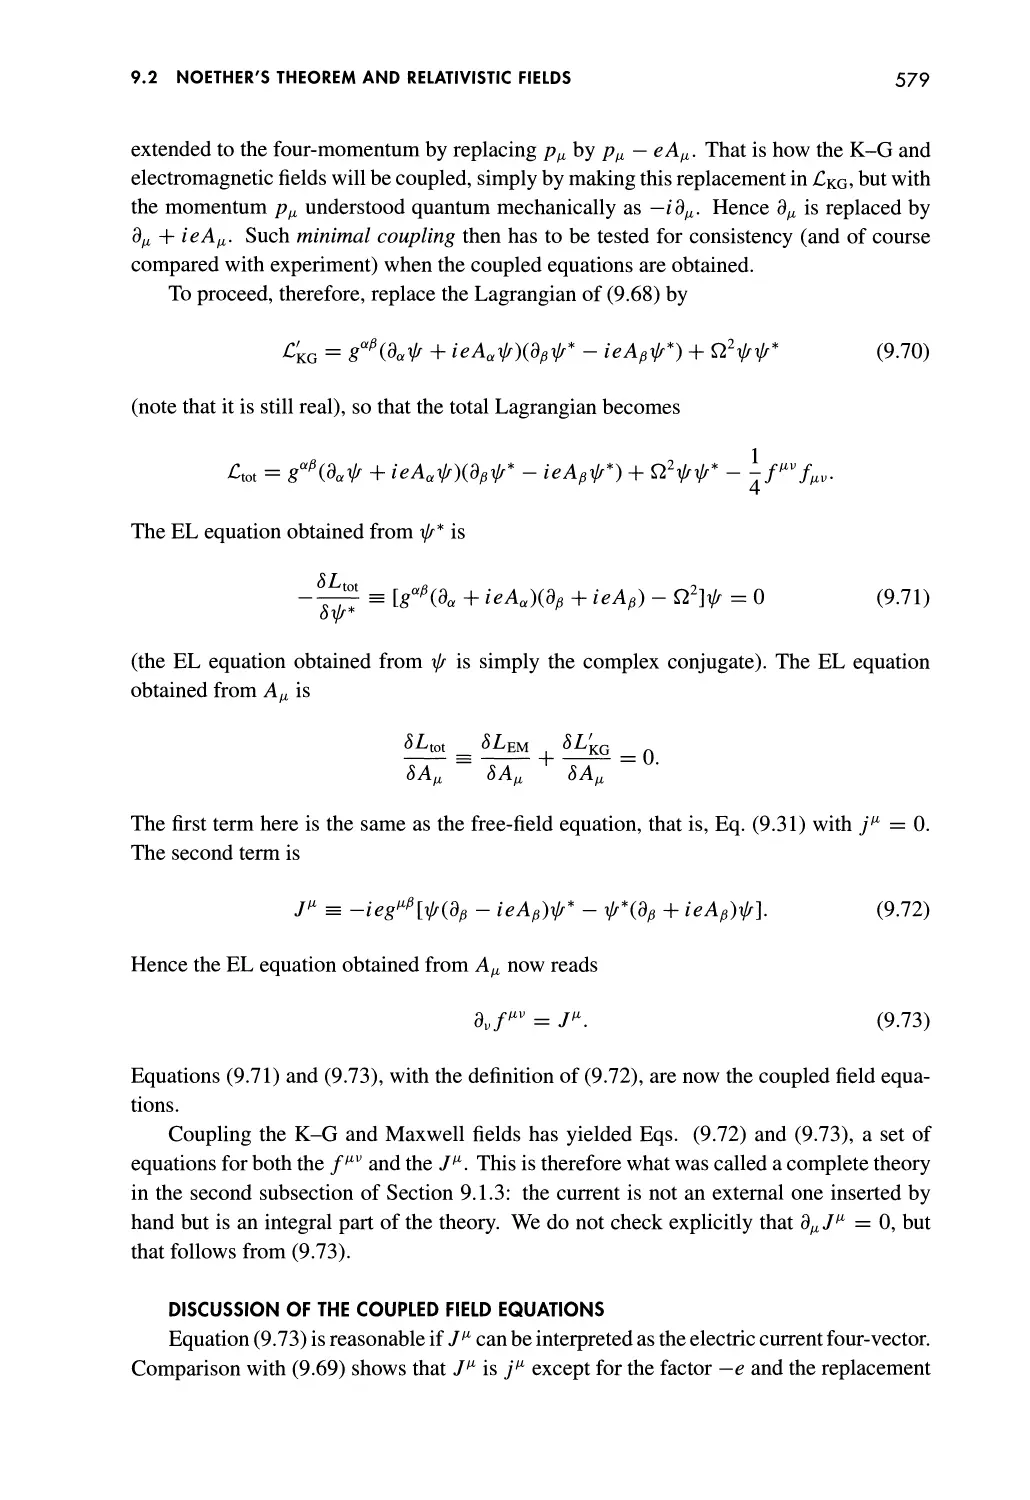 Discussion of the Coupled Field Equations